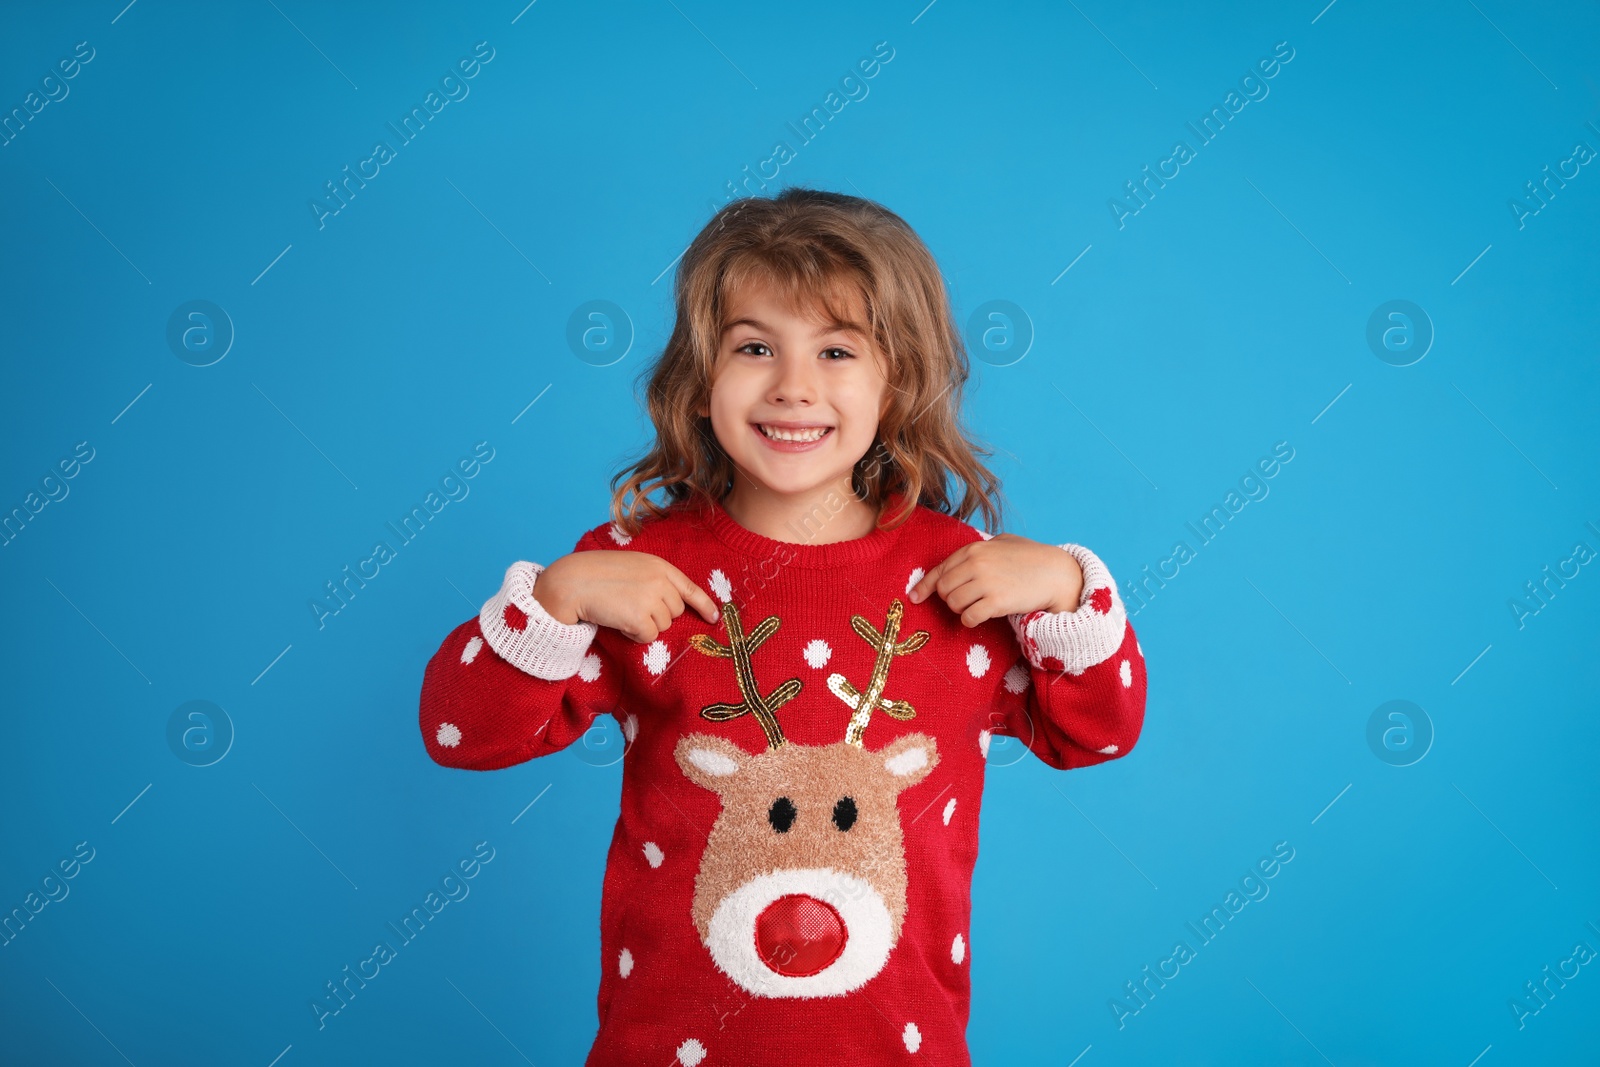 Photo of Cute little girl pointing at her red Christmas sweater against blue background